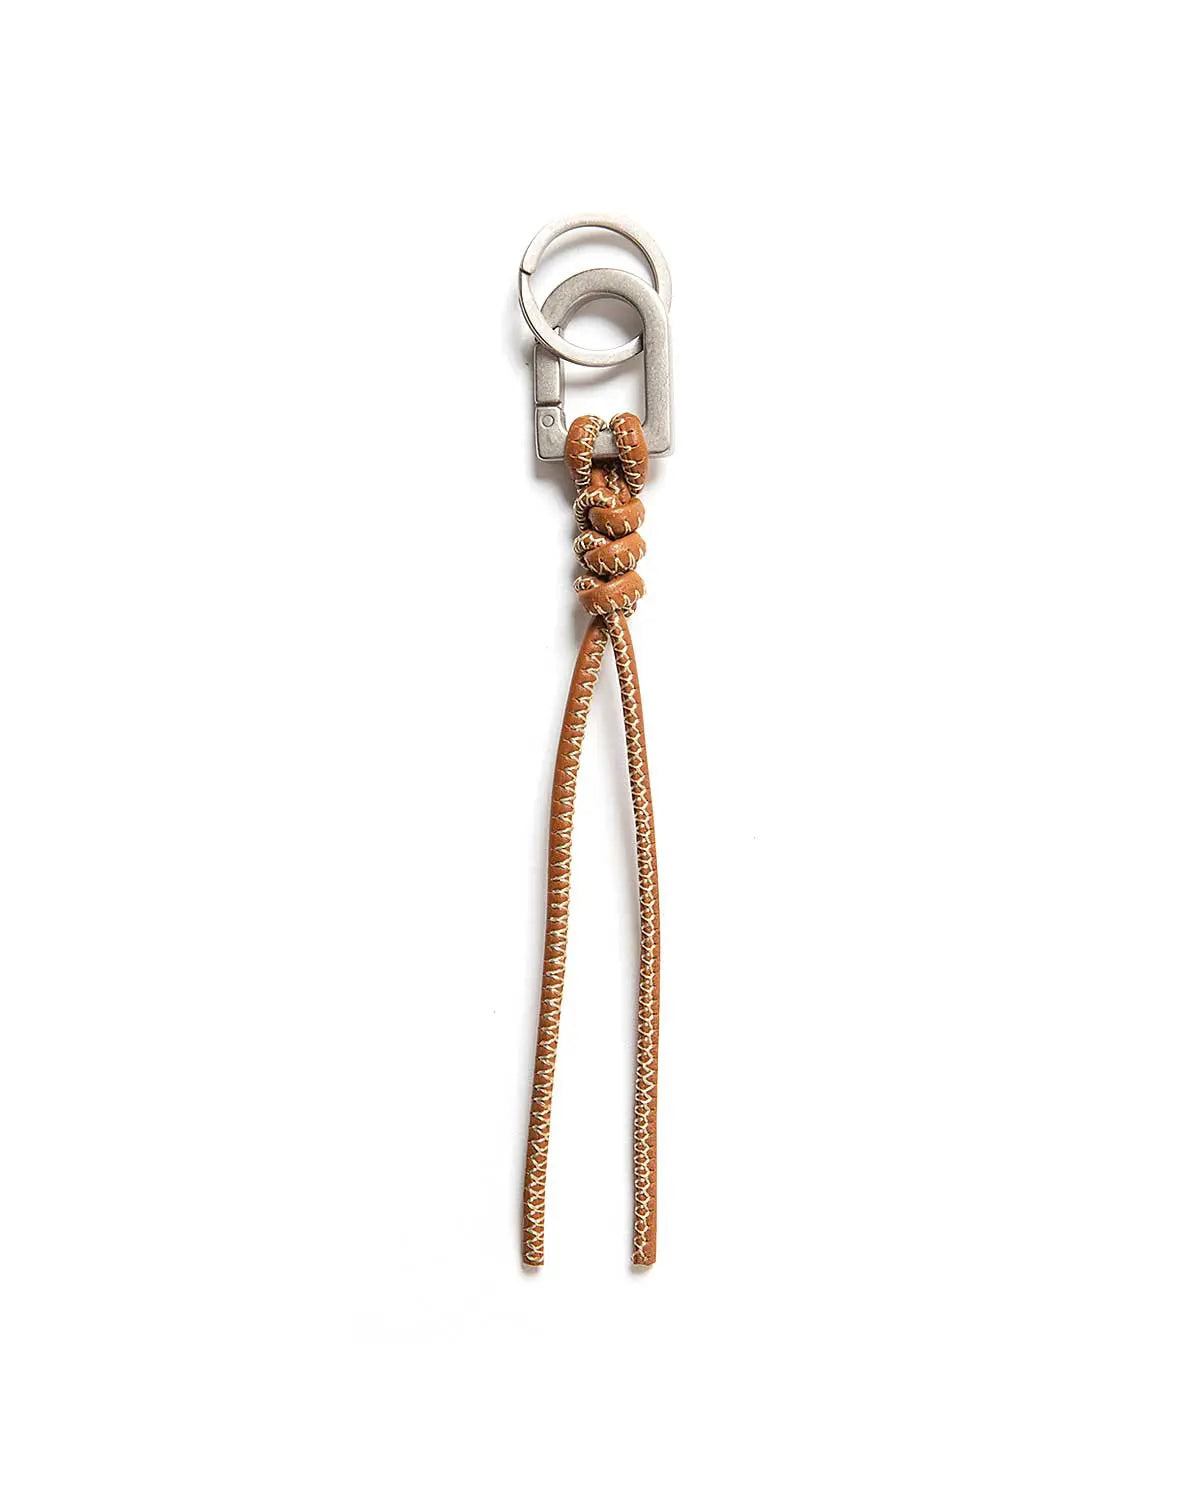 Whip Stitch Cord Key Ring Cow Leather